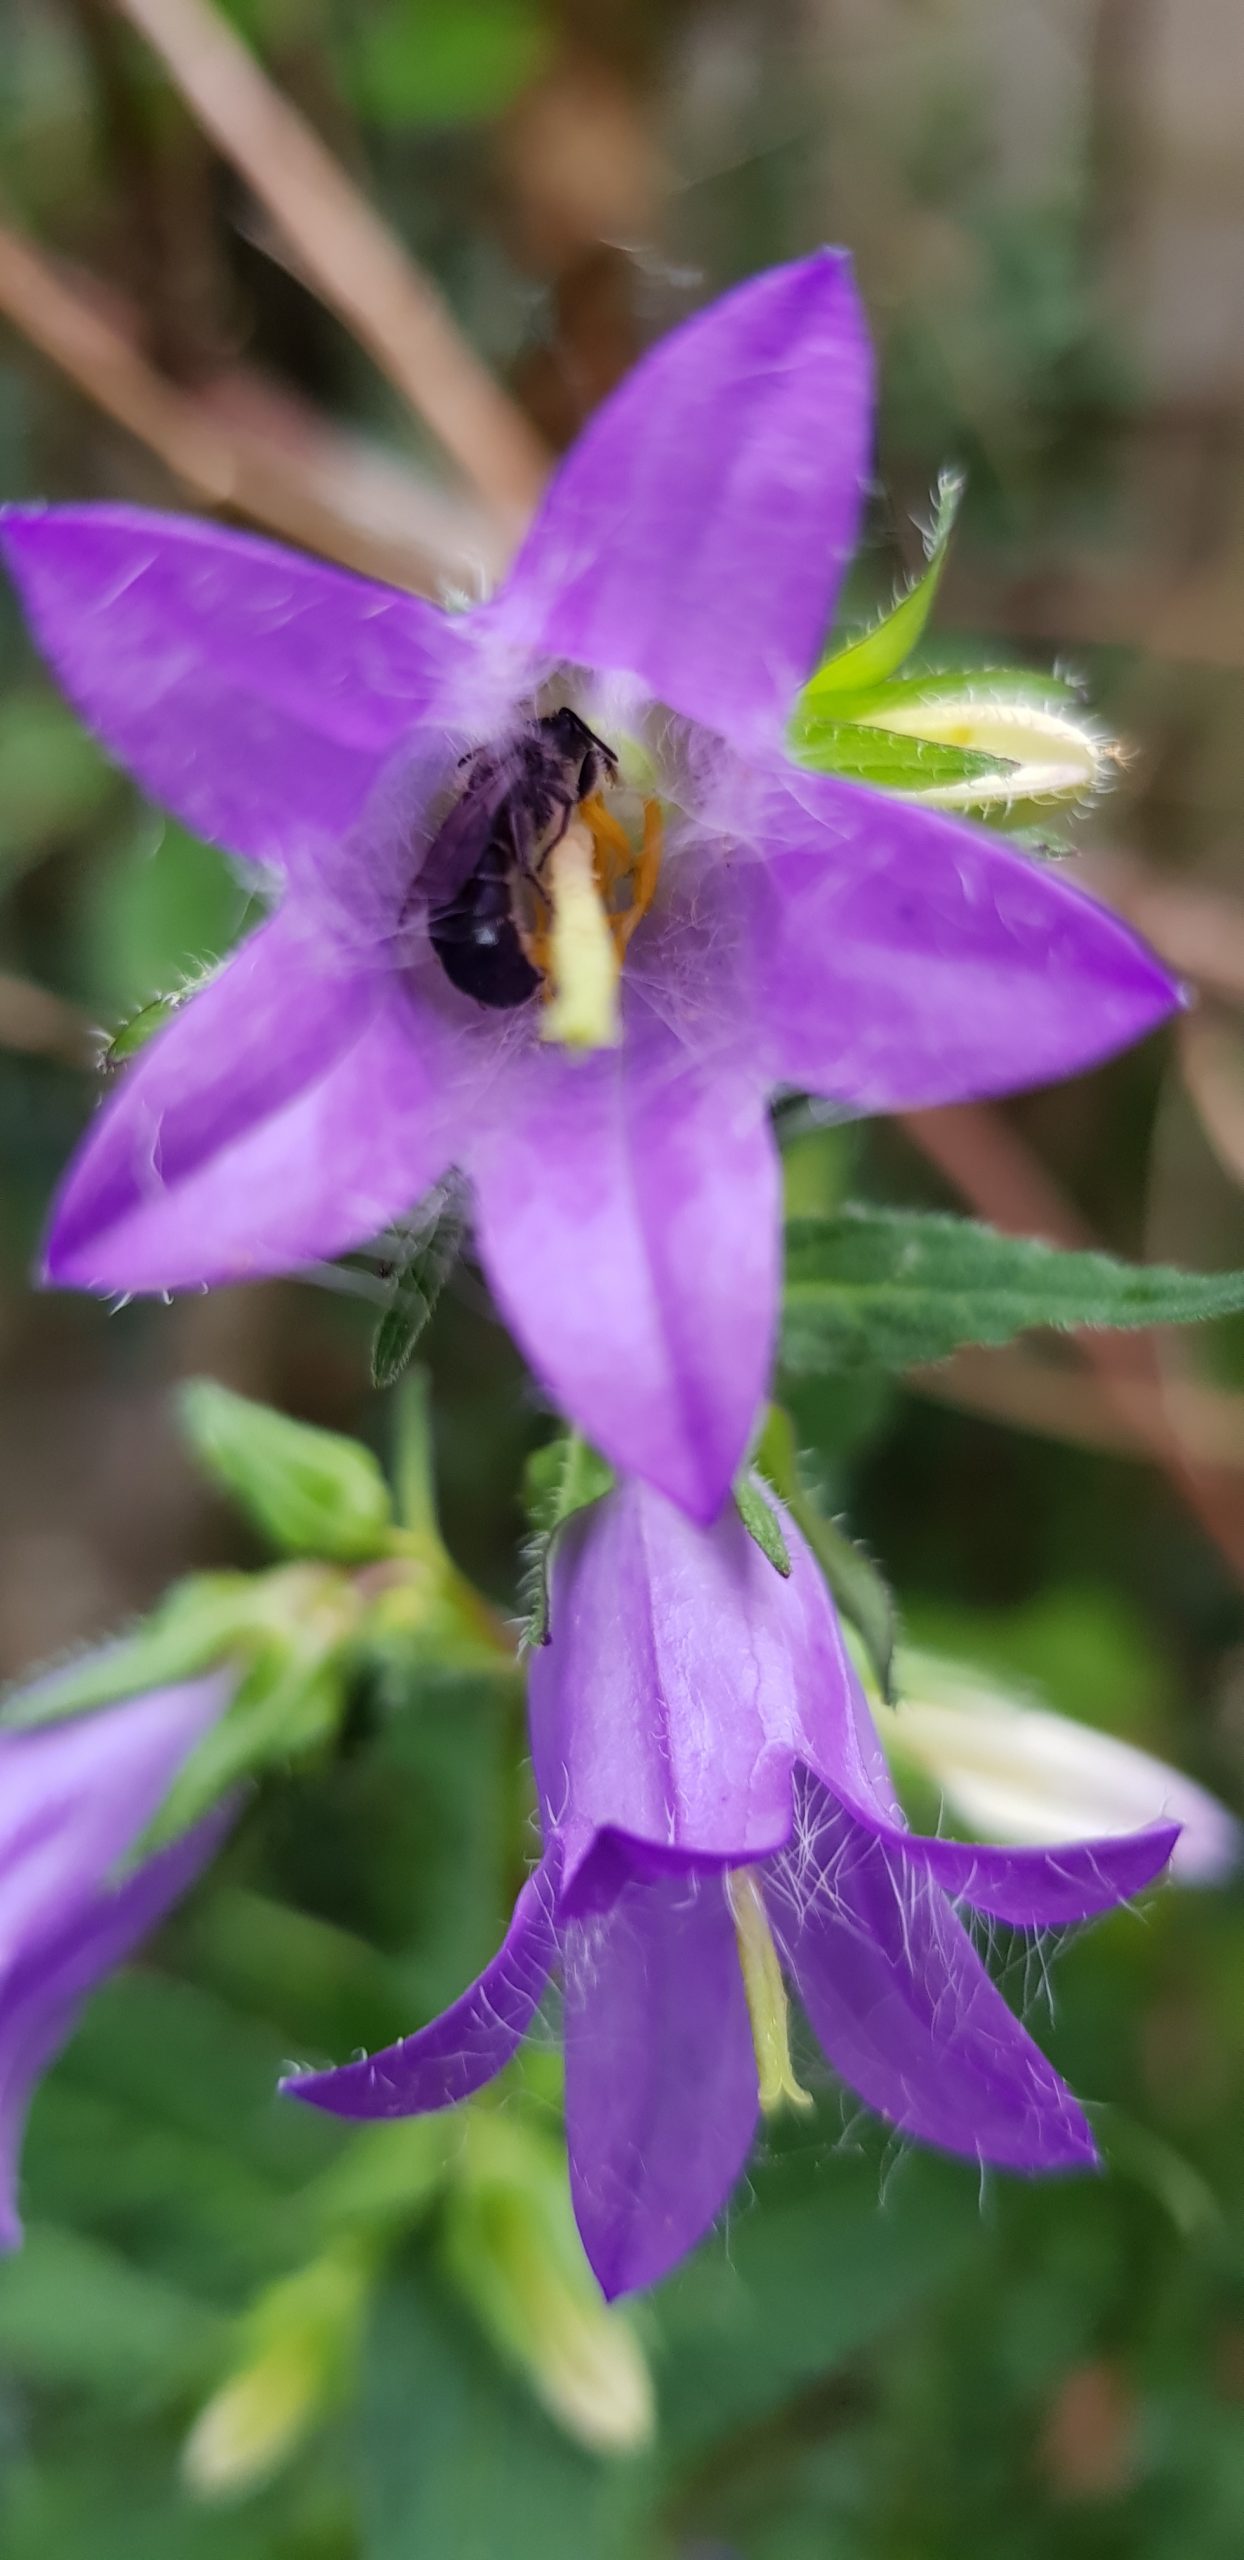 A purple flower with a bee in the center of it